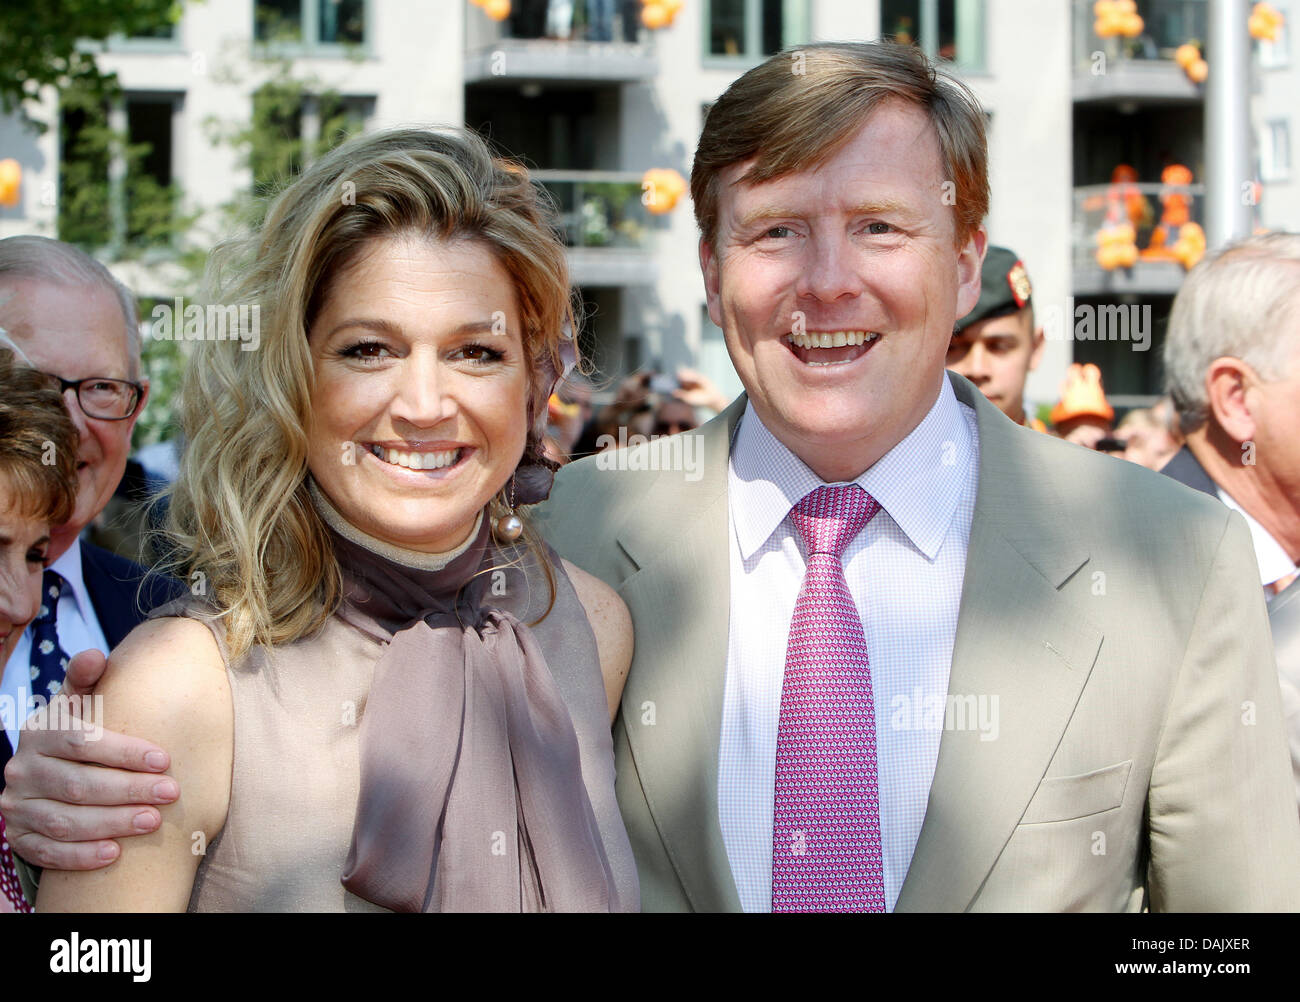 crown-prince-willem-alexander-and-princess-maxima-of-the-netherlands-DAJXER.jpg